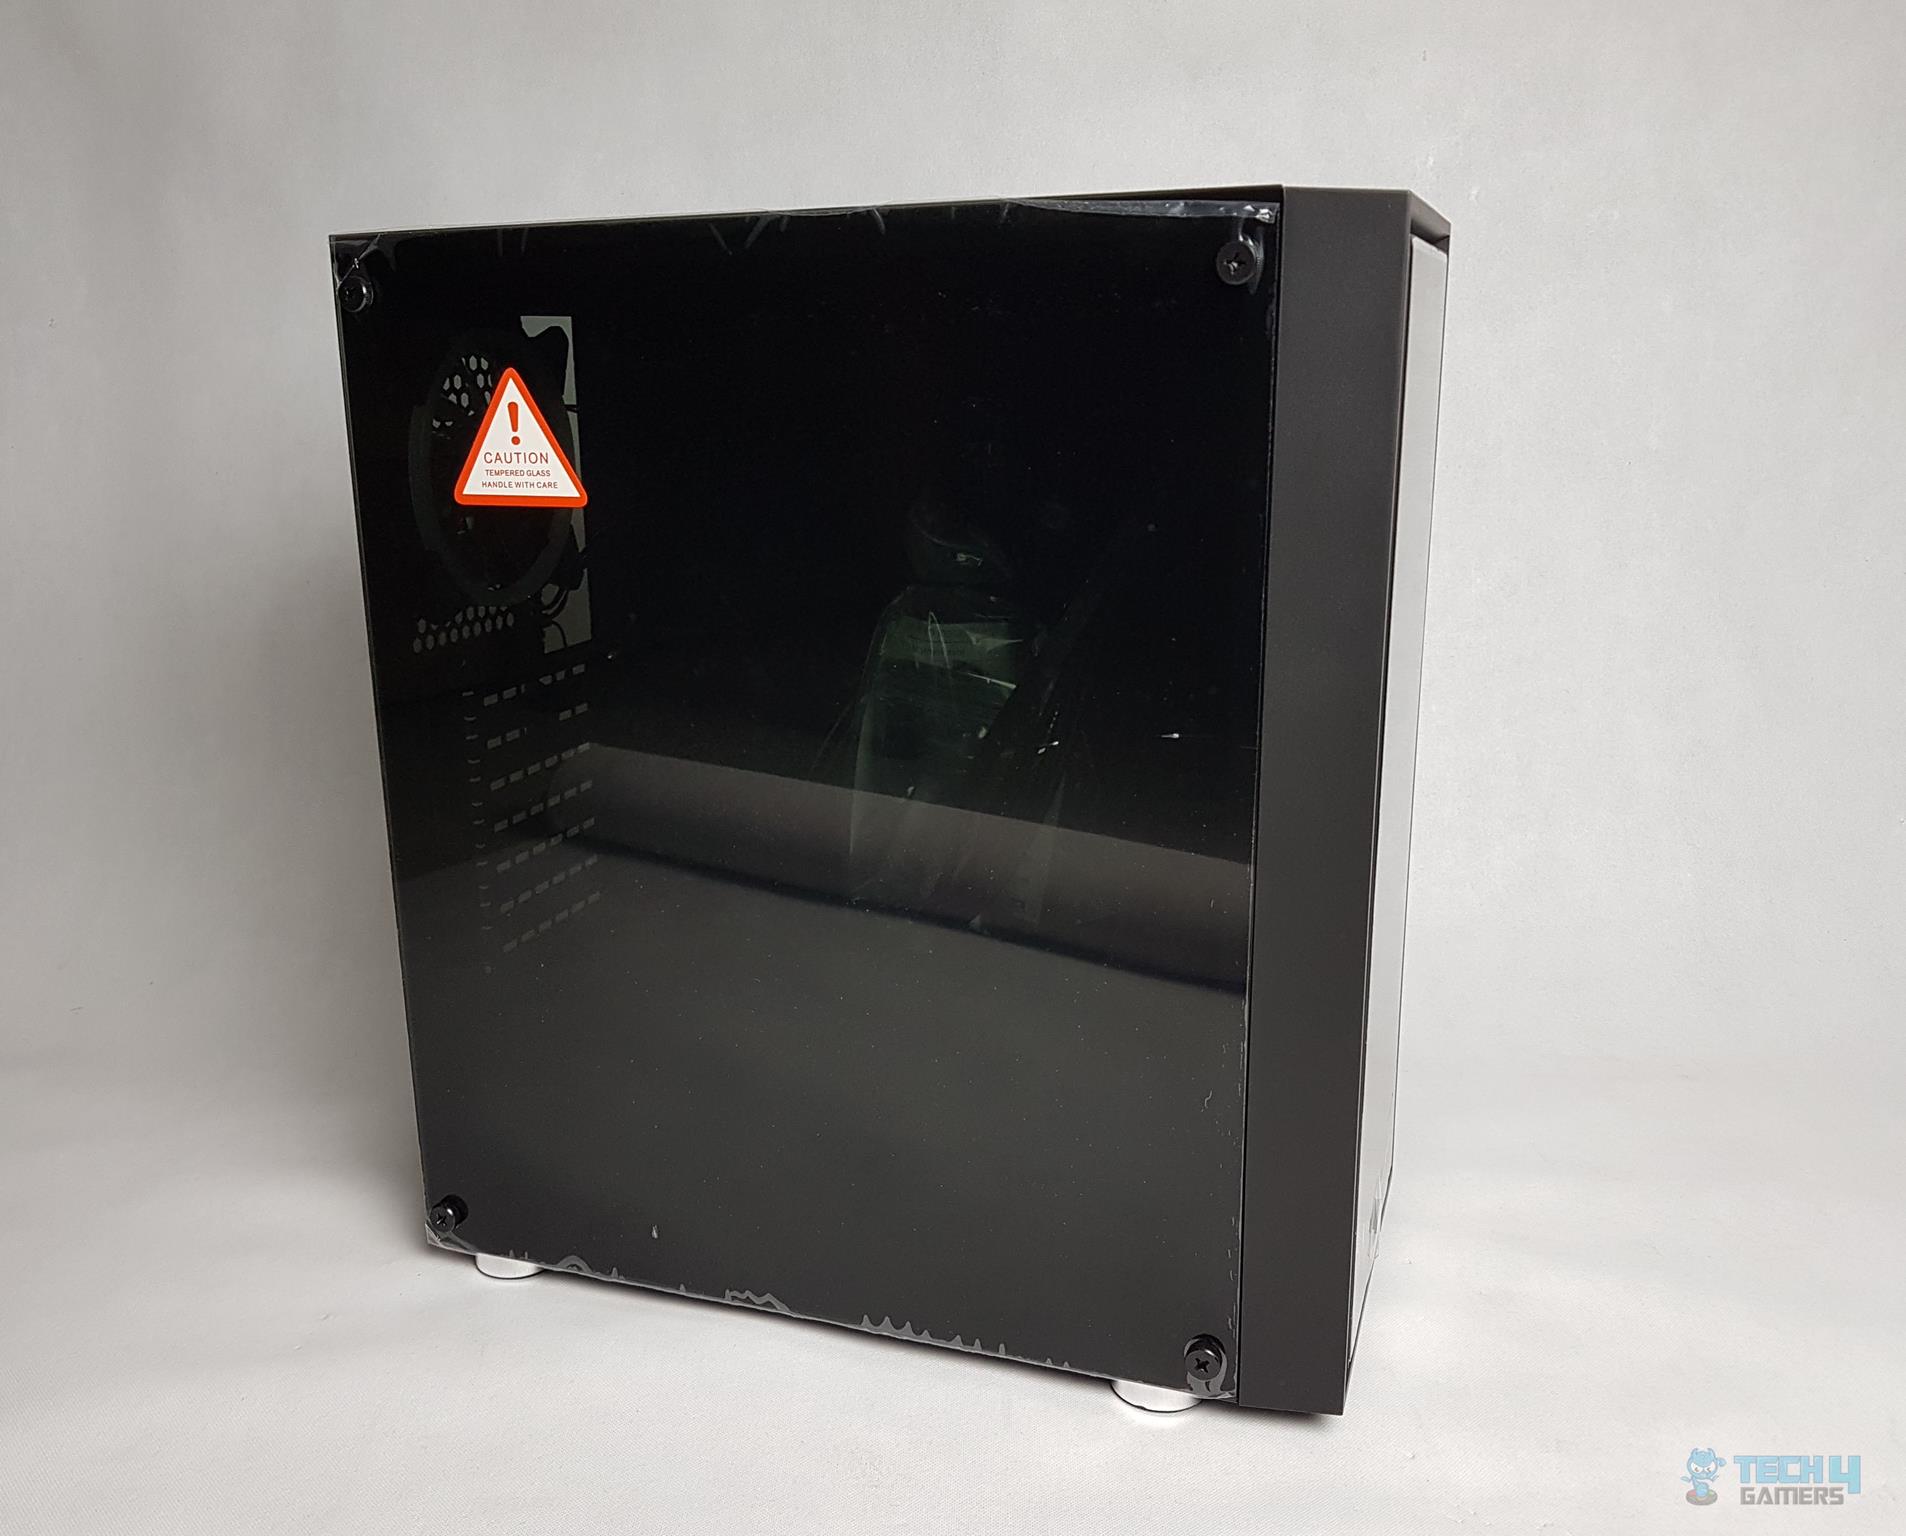  Aerocool Quartz Revo RGB Mid-Tower Chassis — The side panel of the chassis